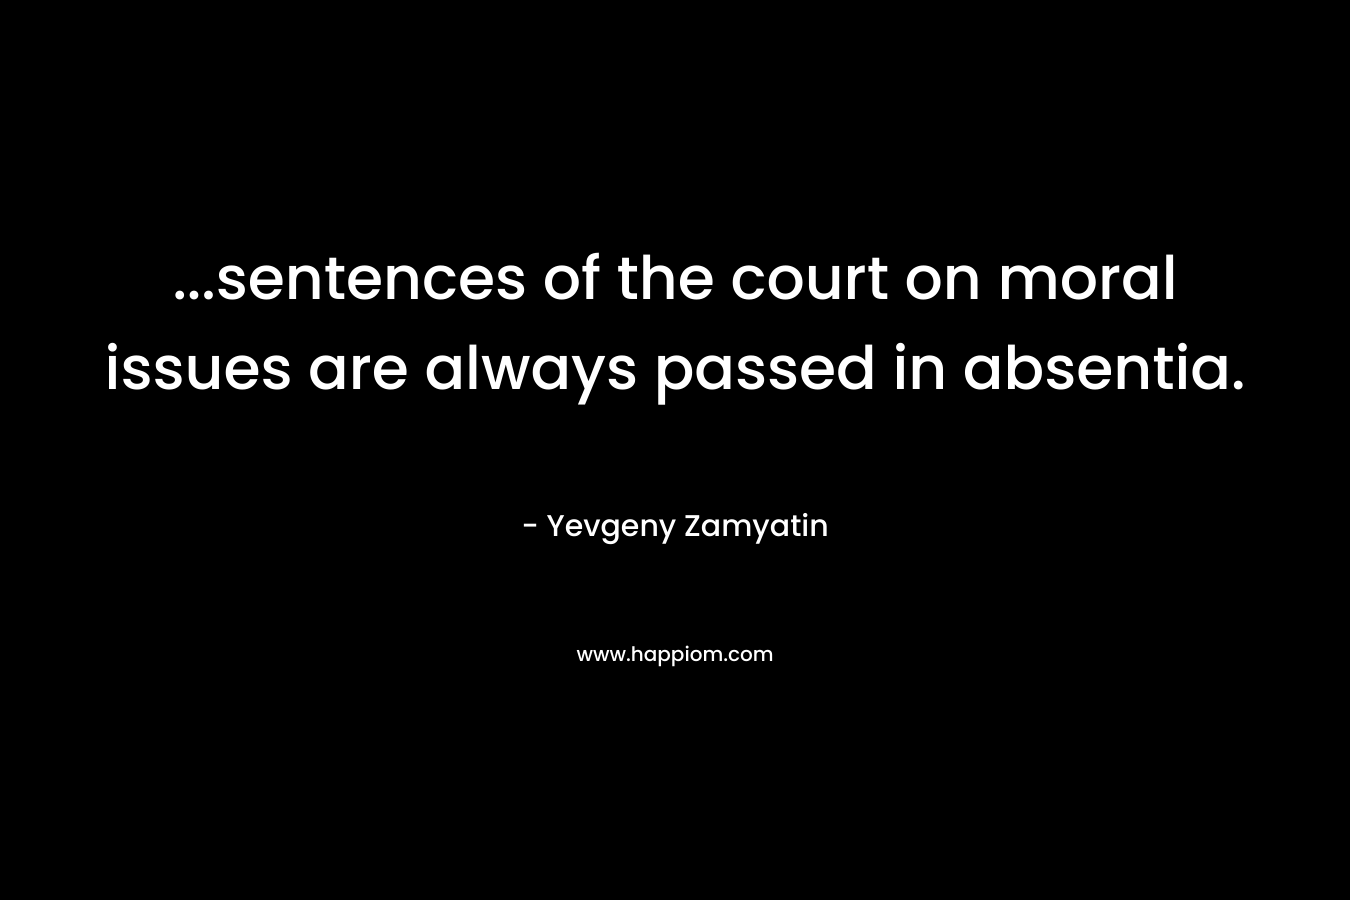 ...sentences of the court on moral issues are always passed in absentia.